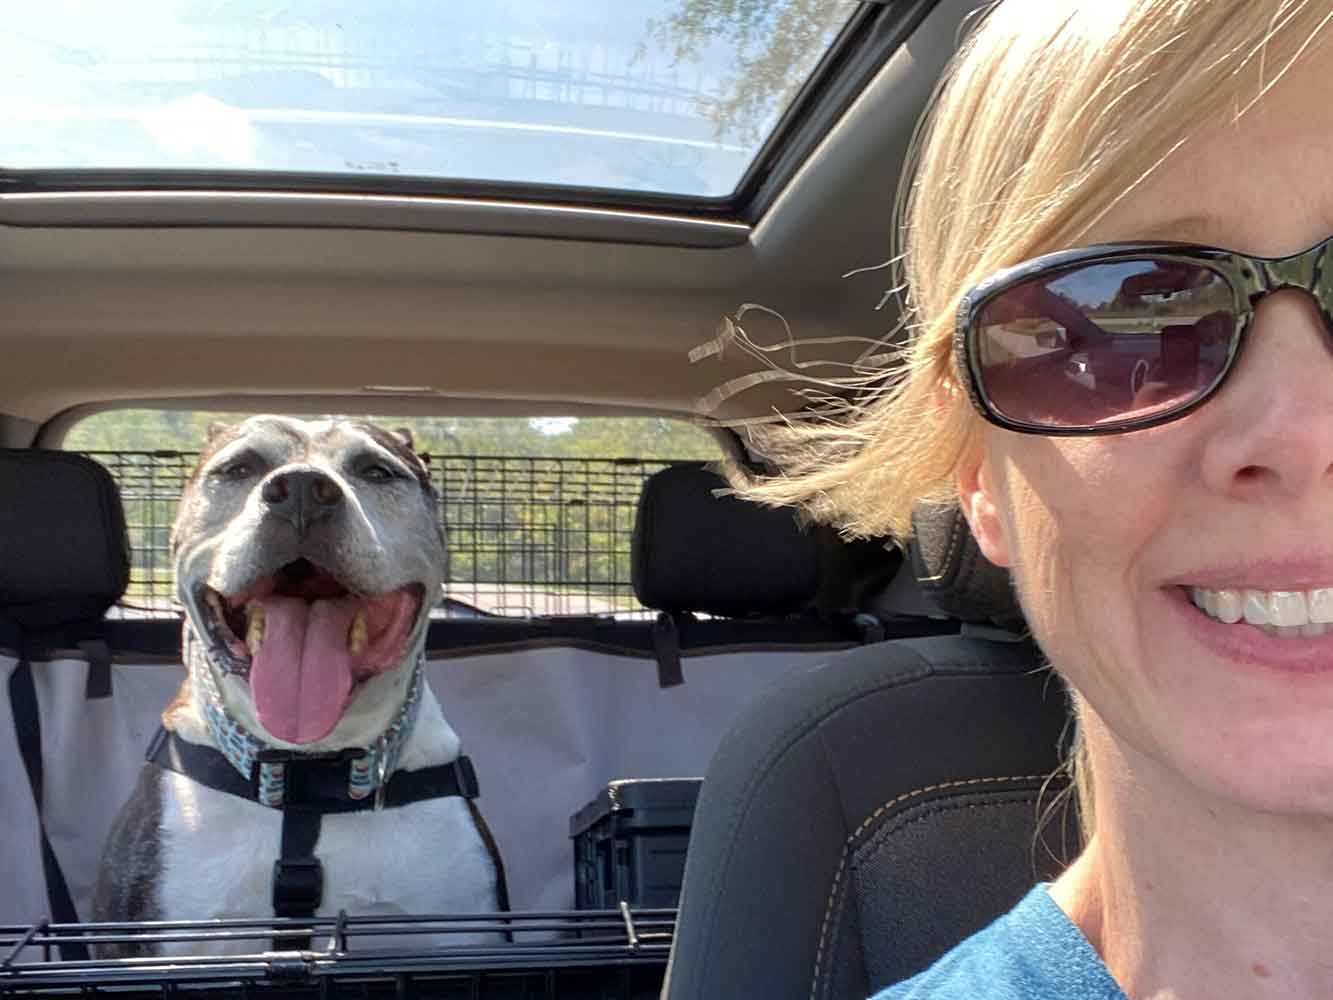 Snuggle Puppy Employee taking a selfie in the car with an adopted shelter dog